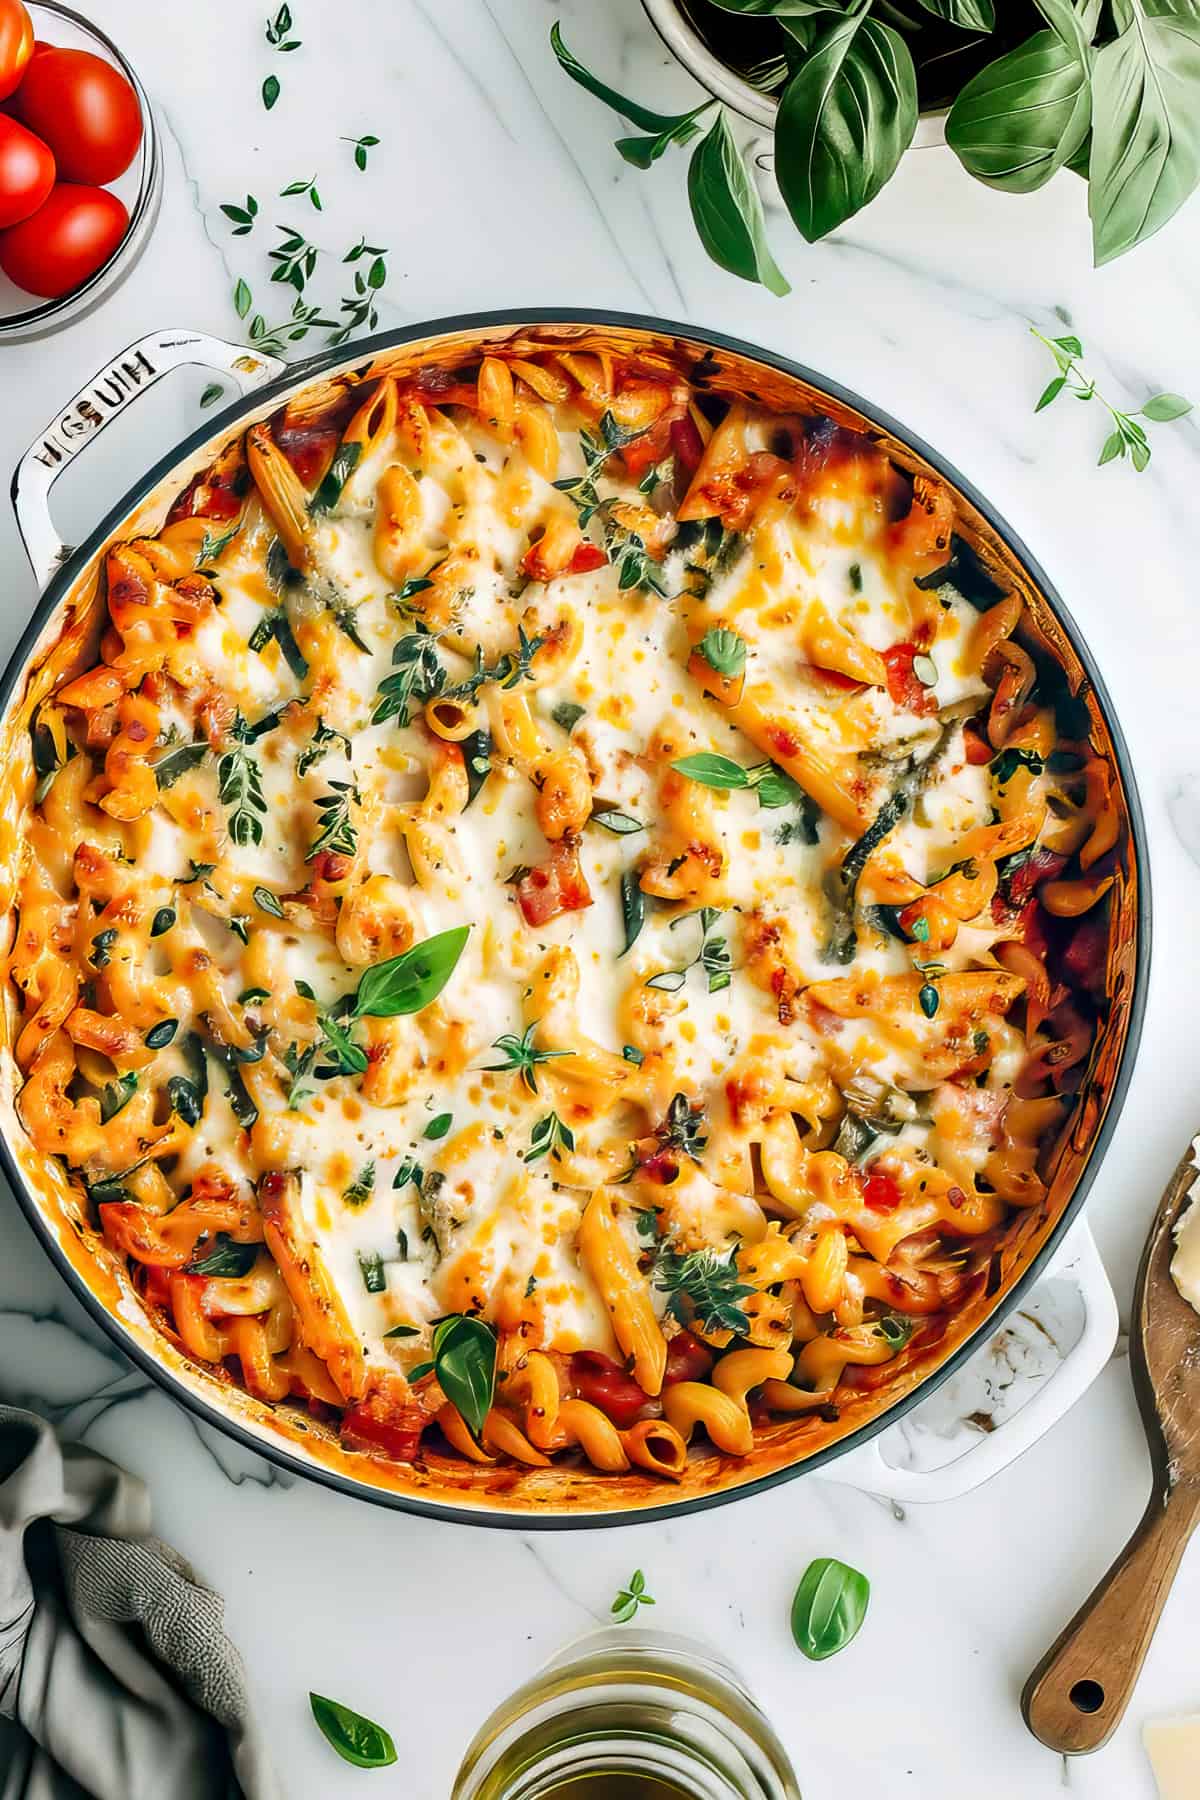 Vegetable pasta bake with penne in a casserole dish with baked cheese.